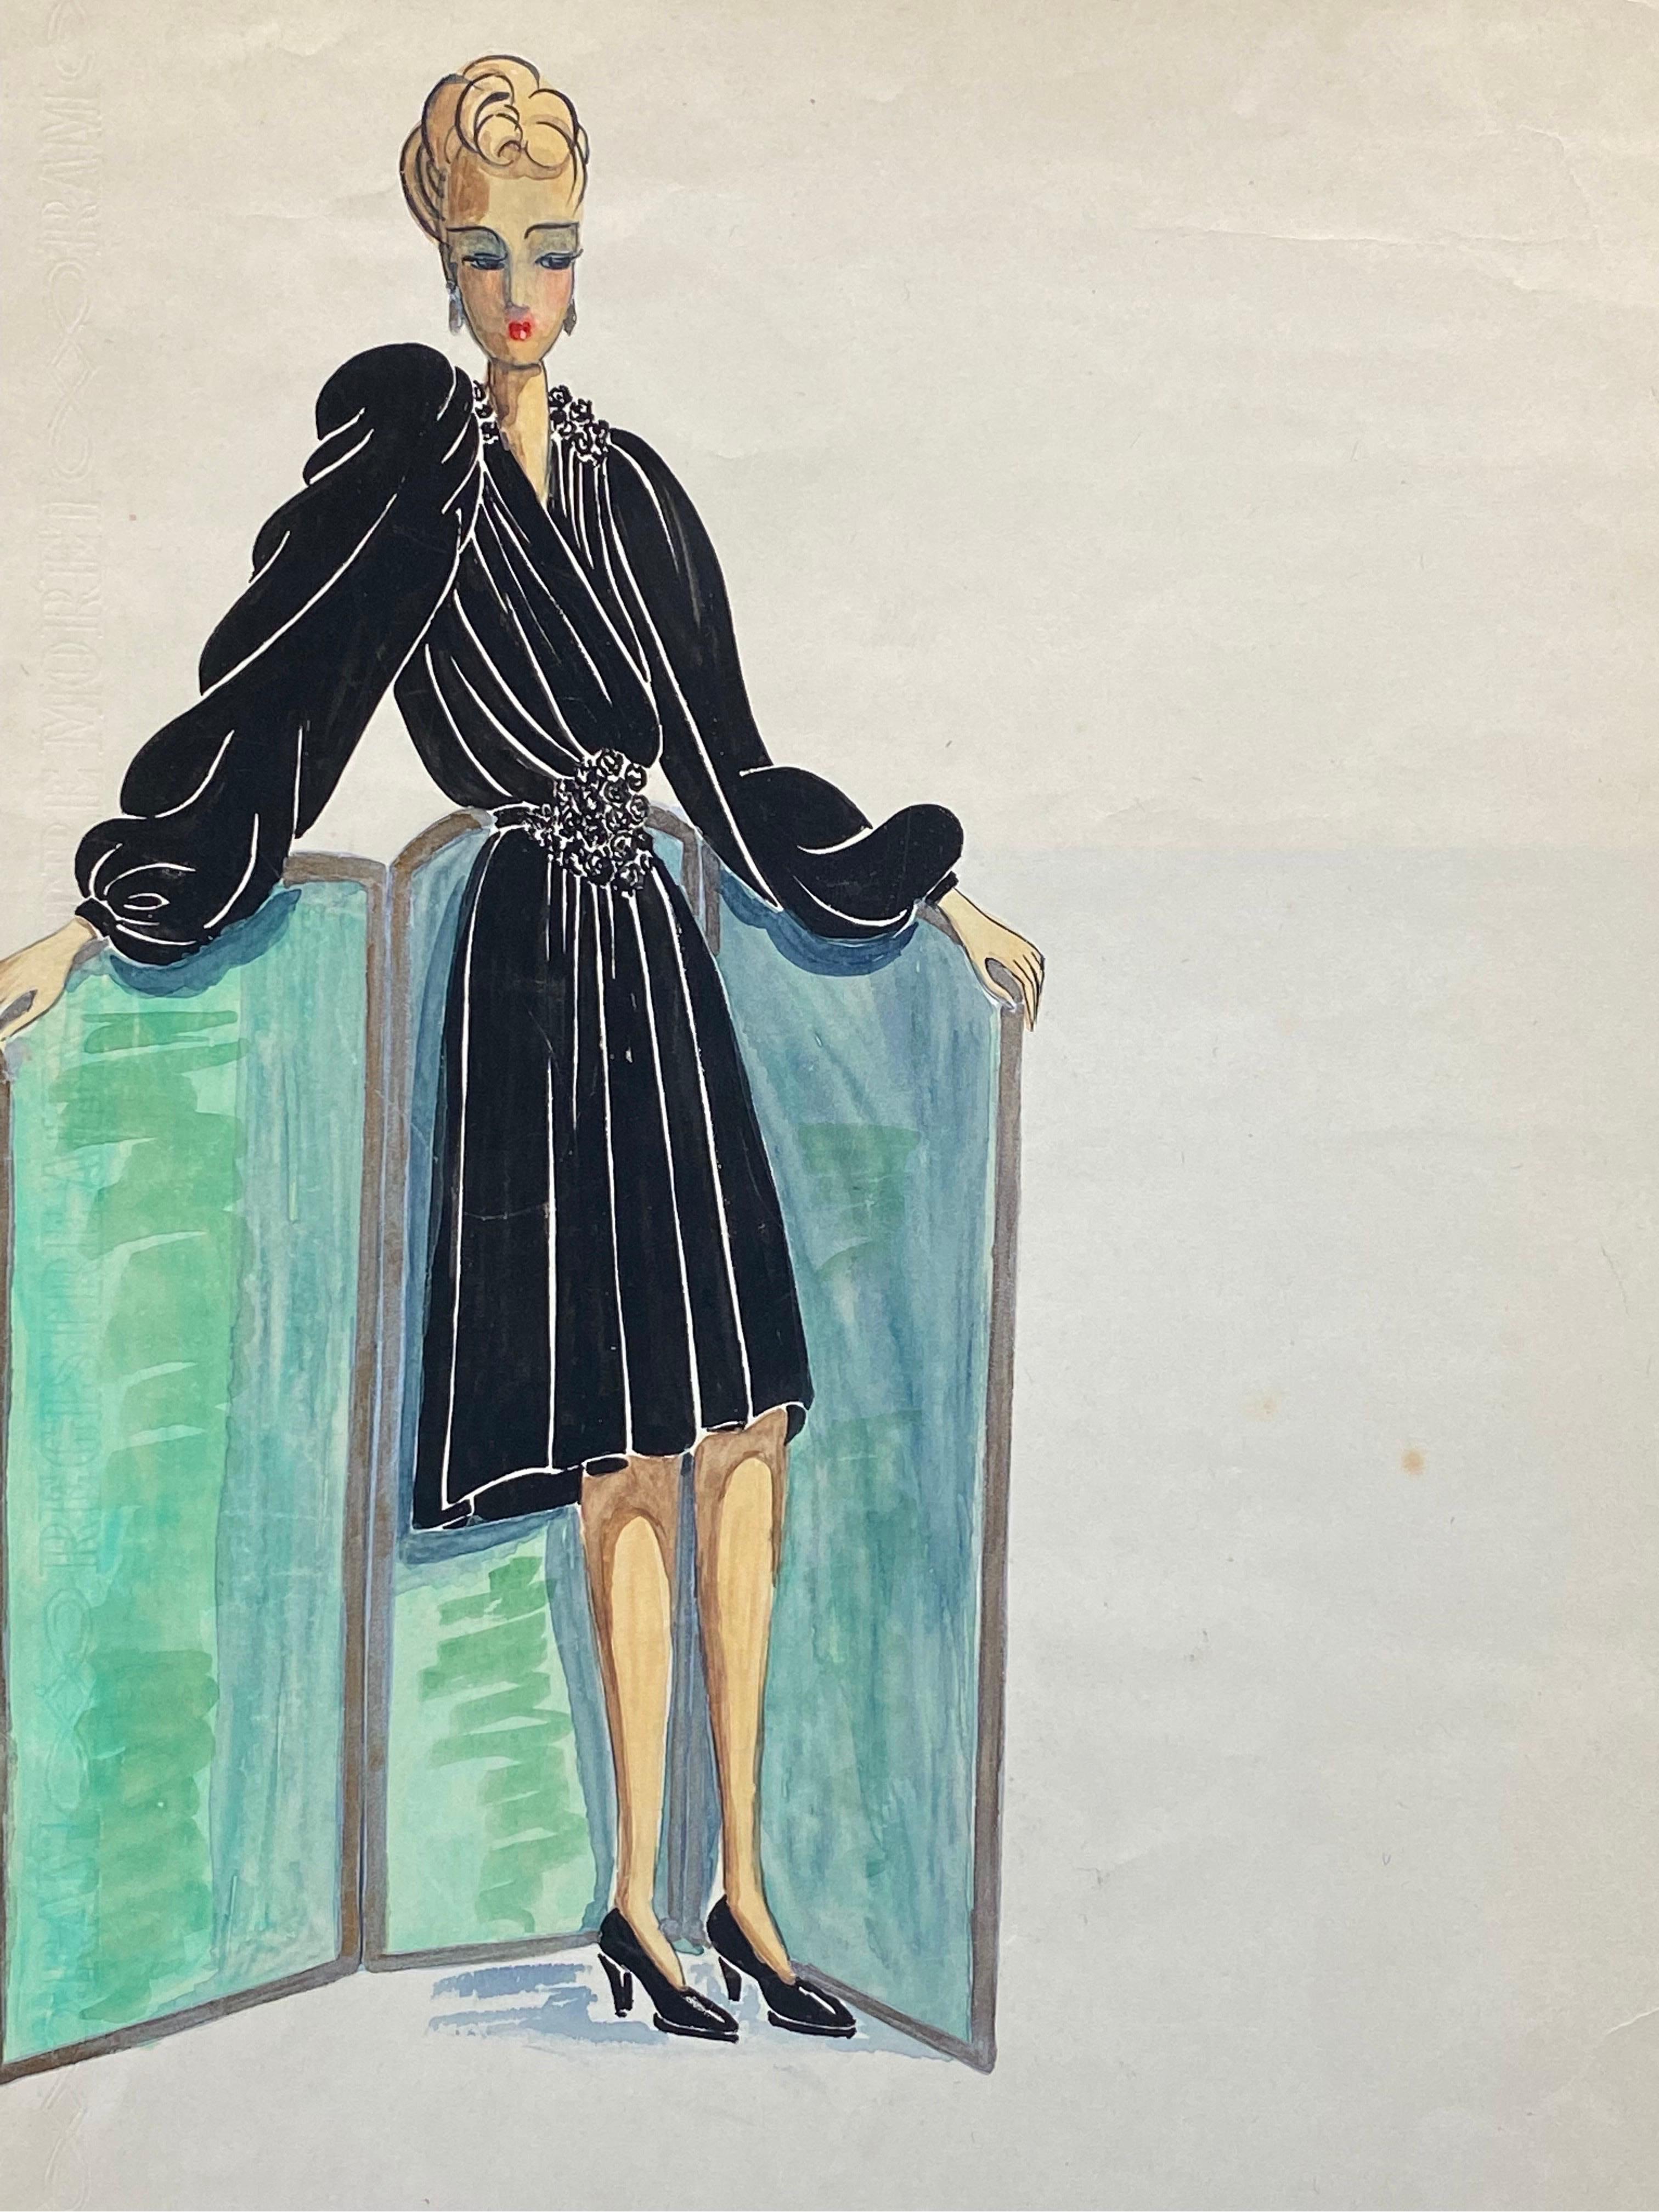 Geneviève Thomas Portrait Painting - 1940's Fashion Illustration - Chanel Styled Woman In Chic Black Dress